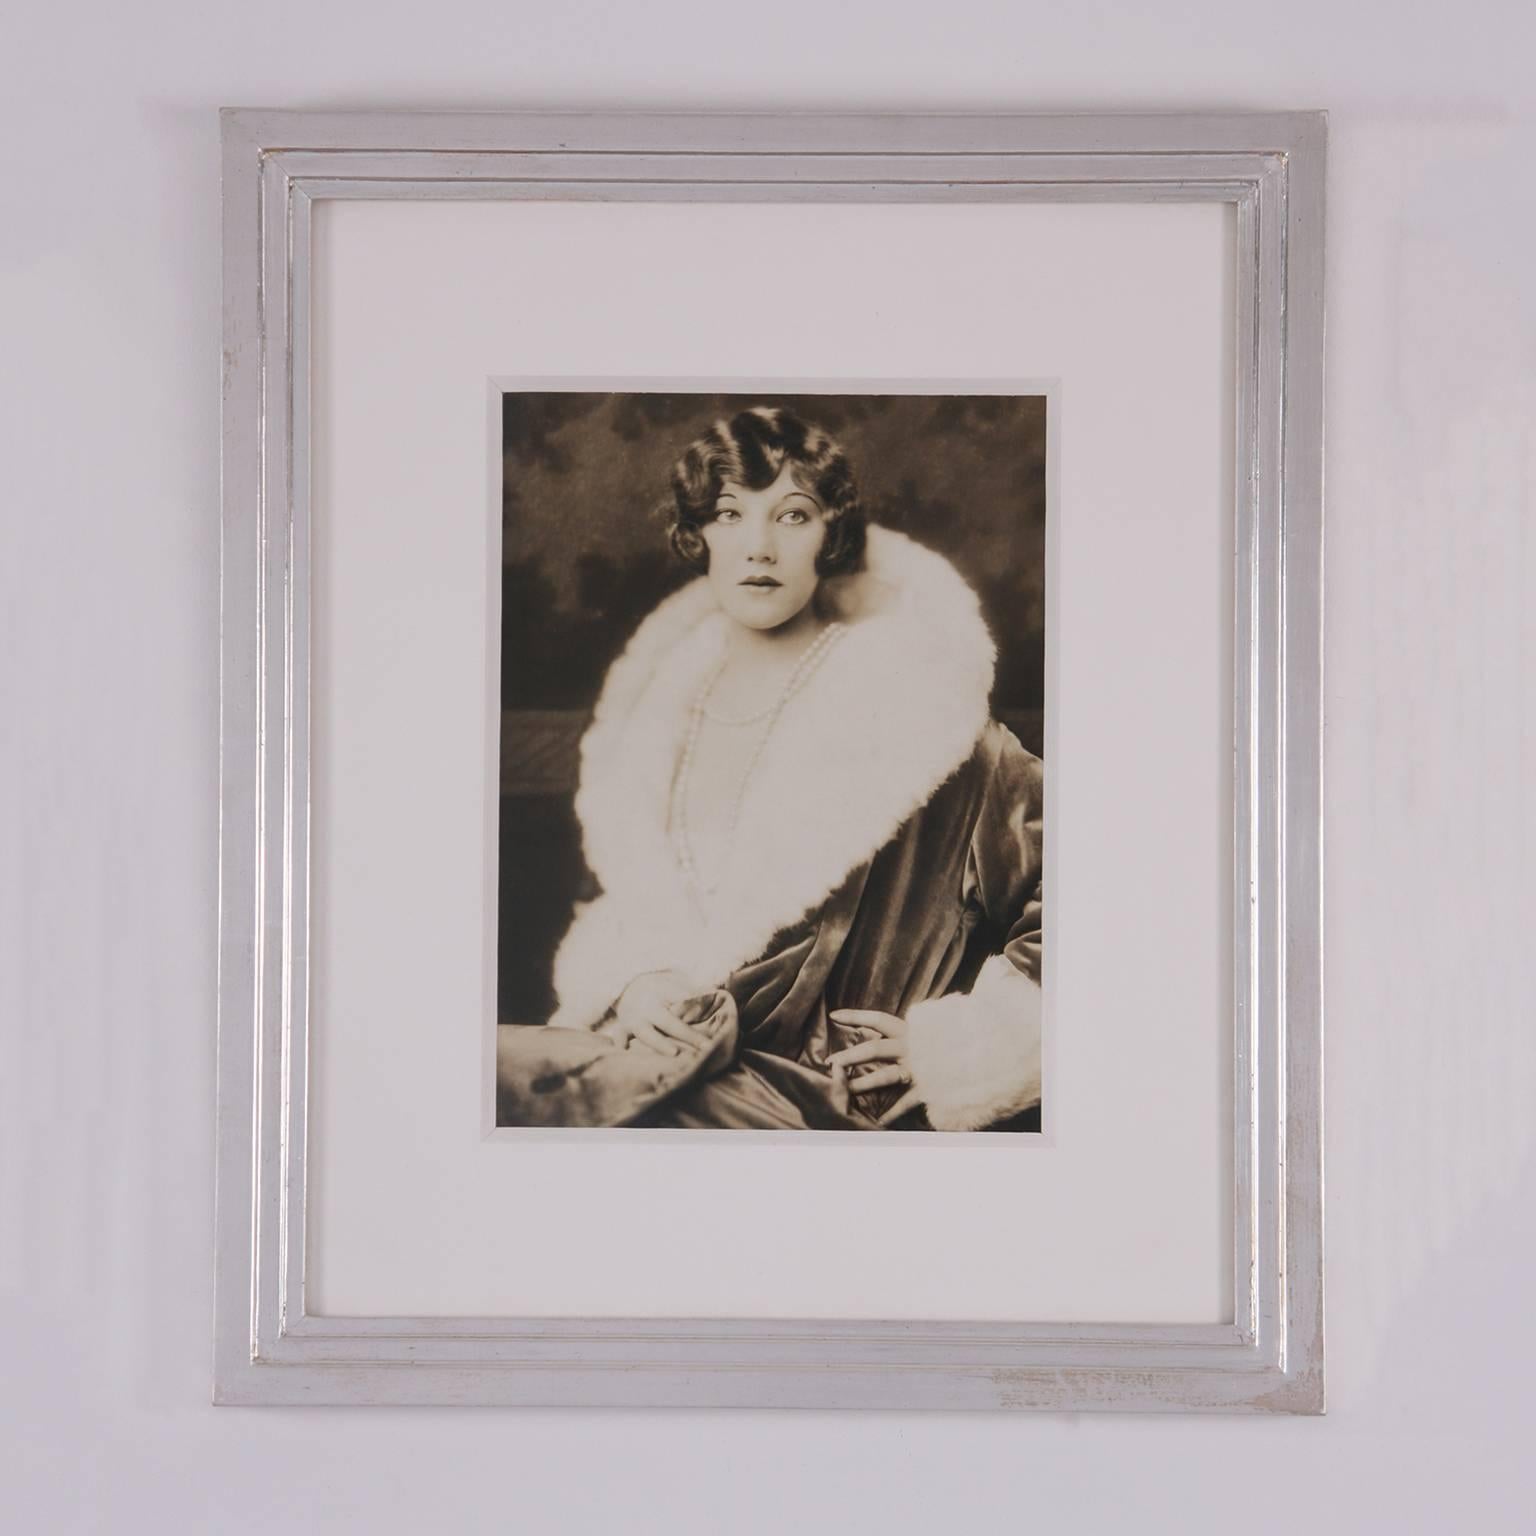 Elsie Behrens, Ziegfeld Follies circa 1920 by Alfred Cheney Johnston (1885-1971) 

In a hand gilded frame, white gold.

Johnston was born into an affluent New York banking family, which subsequently moved to Mount Vernon, New York. Initially he